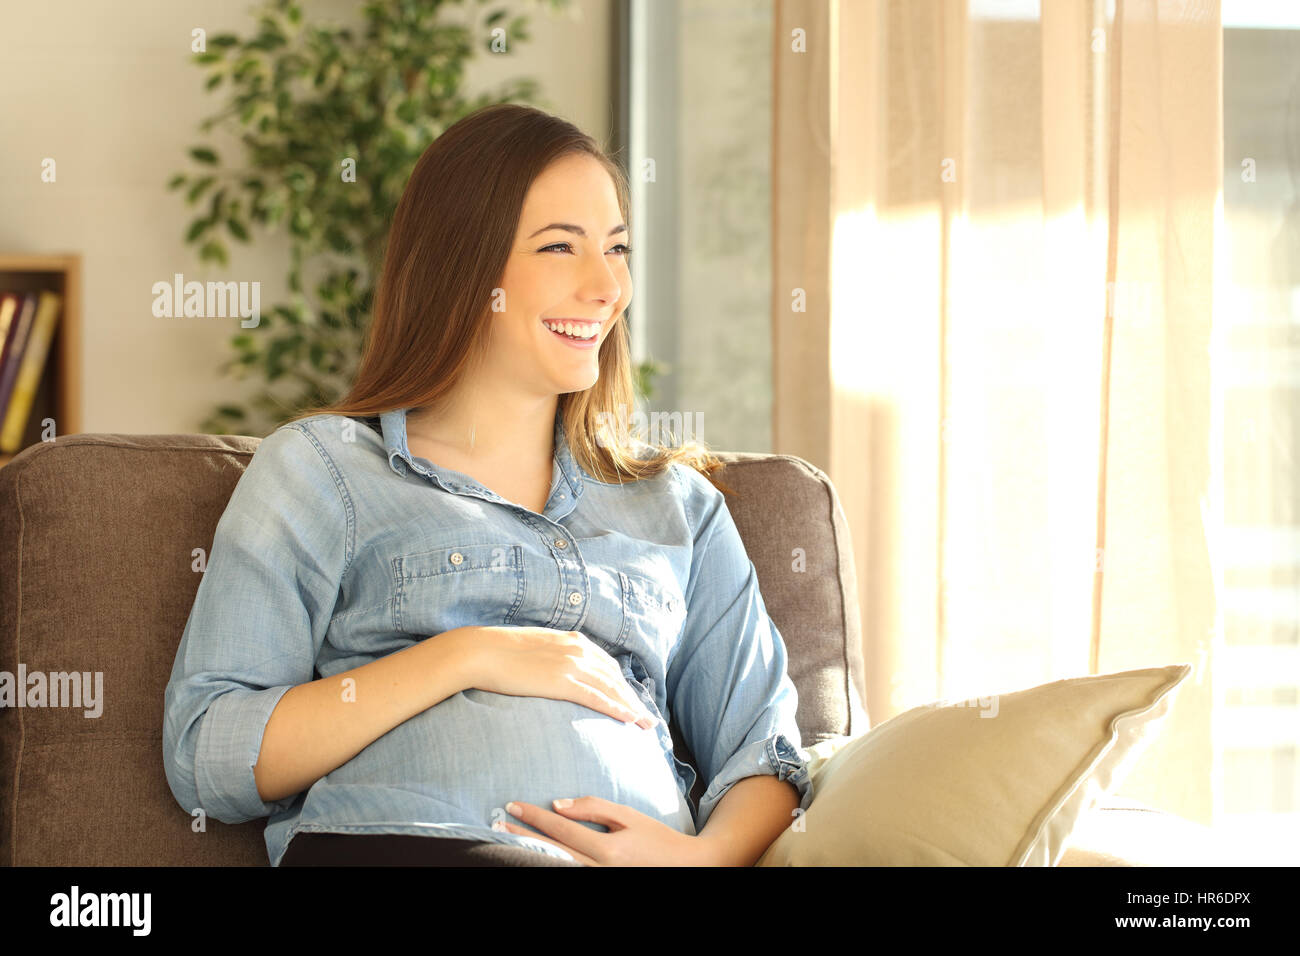 Pregnant woman looking through a window sitting on a sofa in the living room at home with a warm sunlight Stock Photo